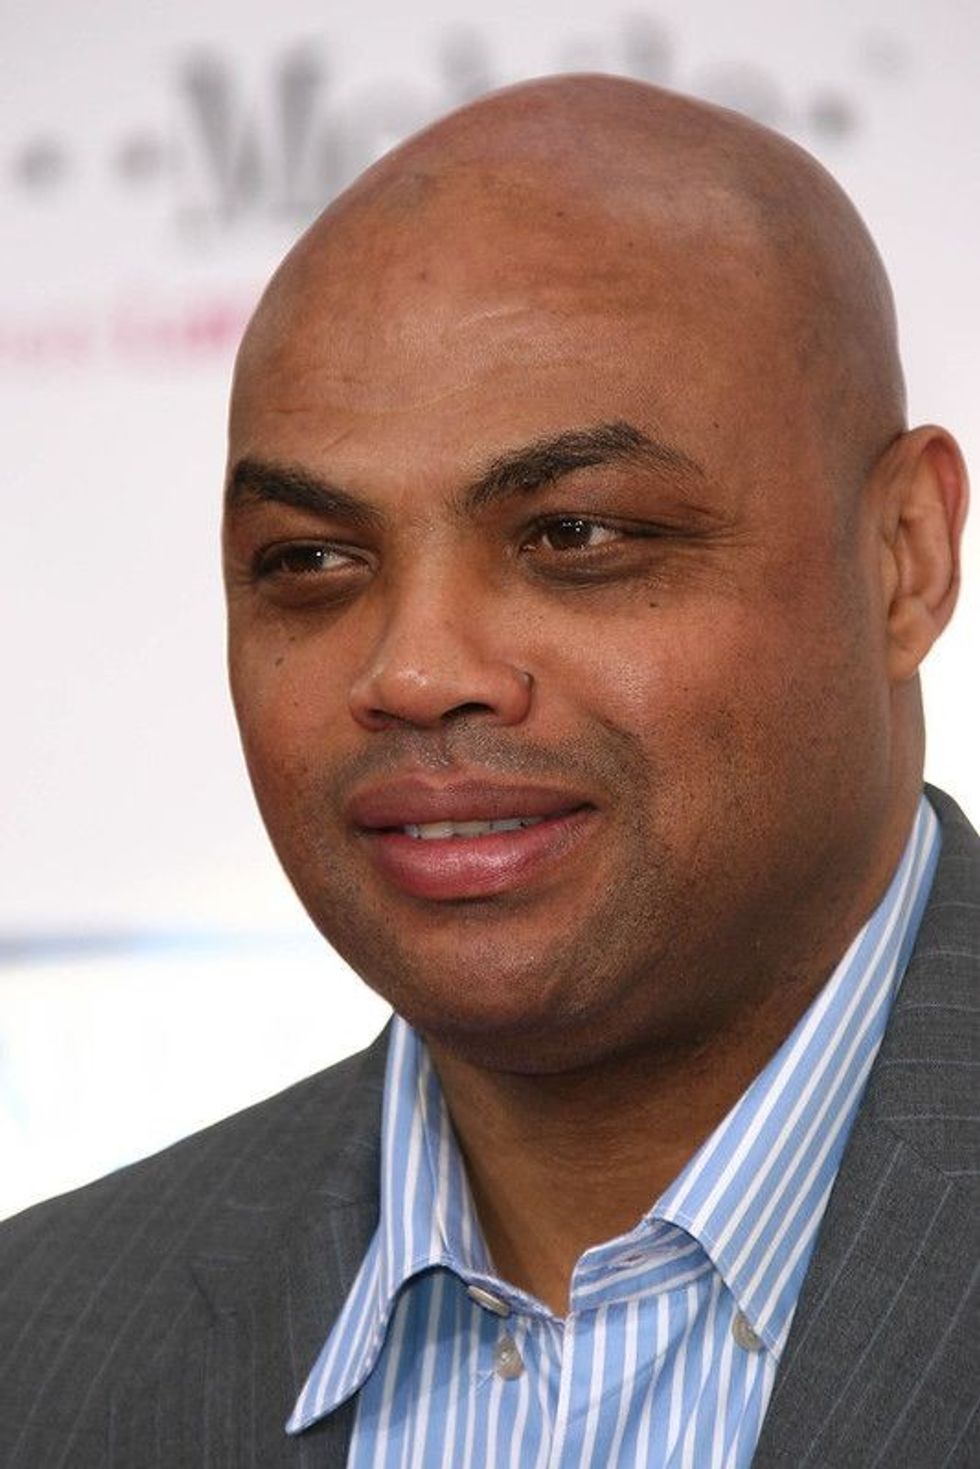 Candid picture of Charles Barkley at an event